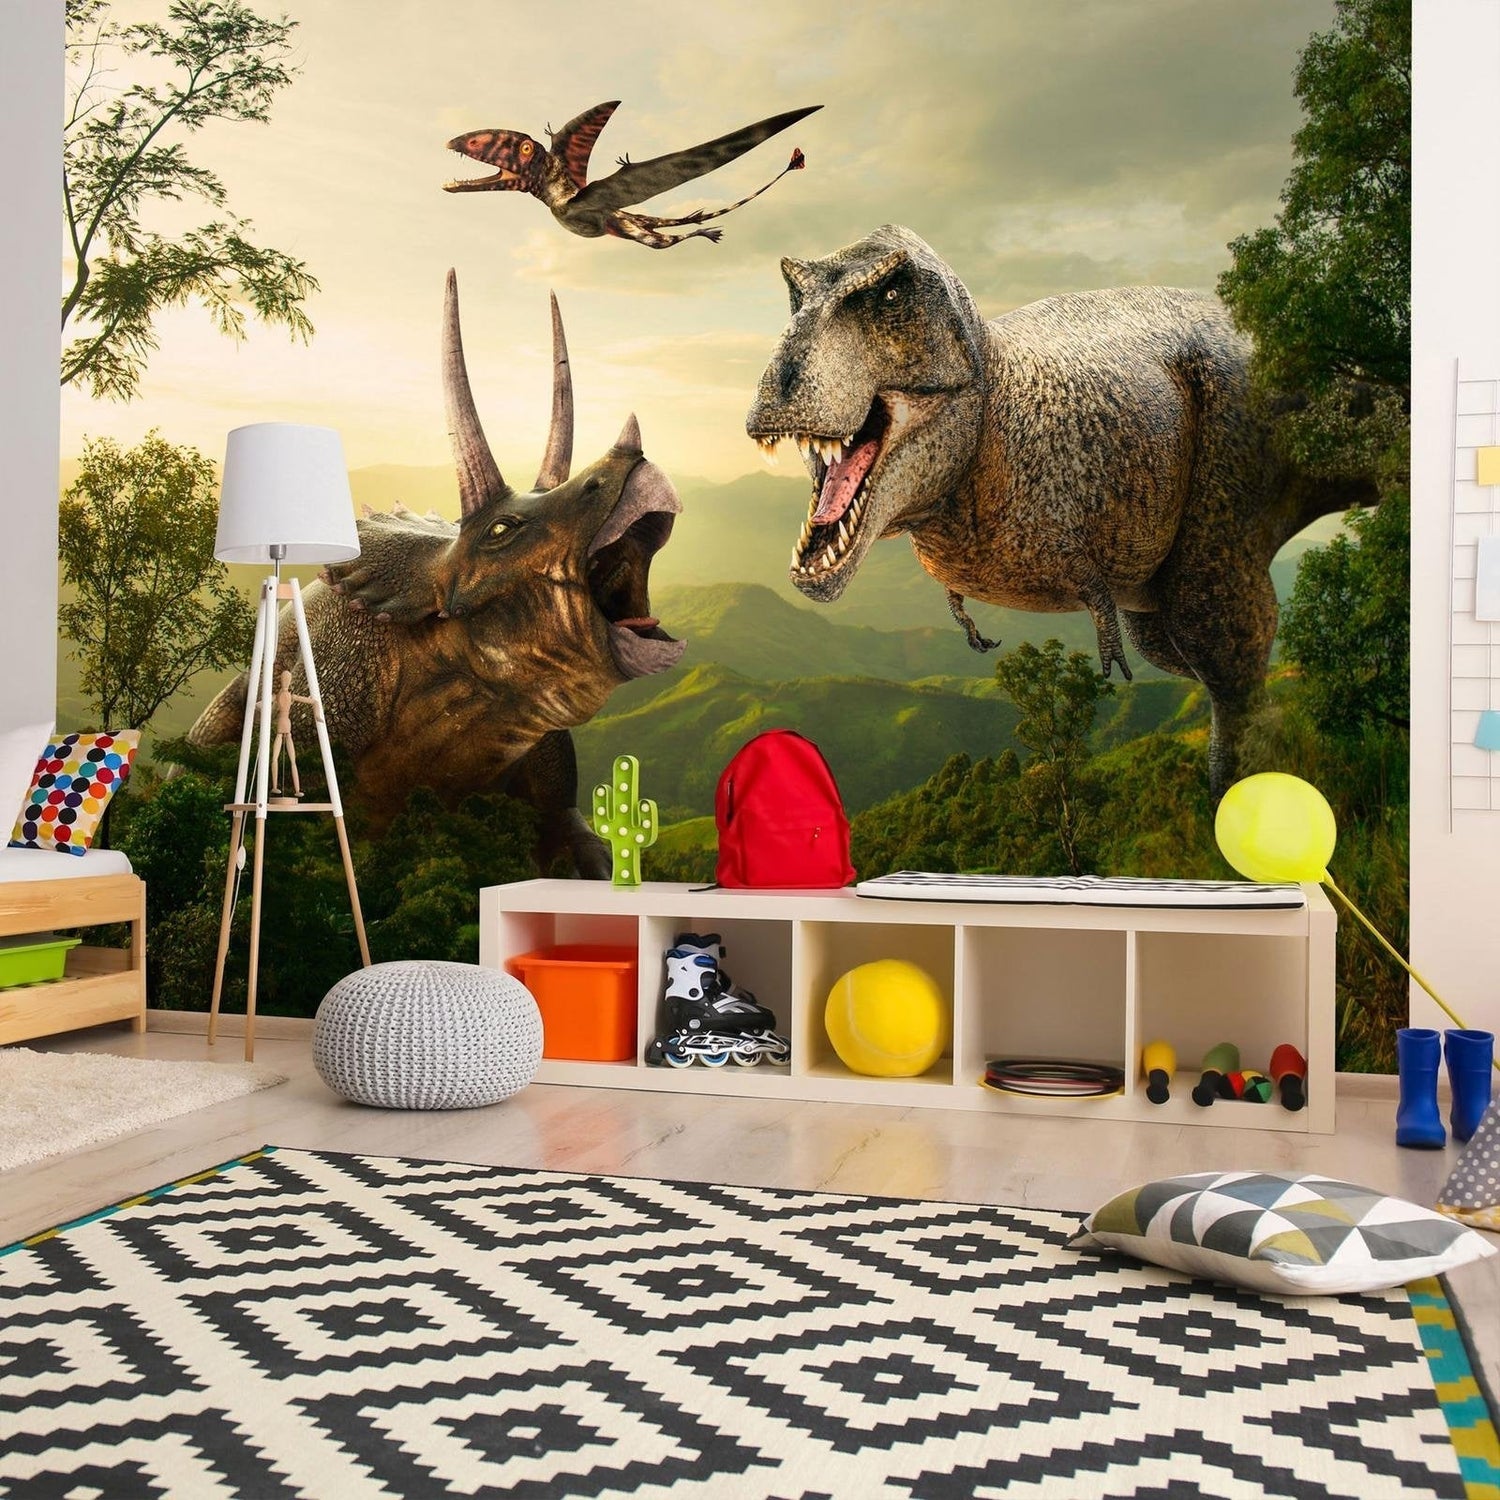 Peel and stick wall mural - Dinosaur Square-TipTopHomeDecor